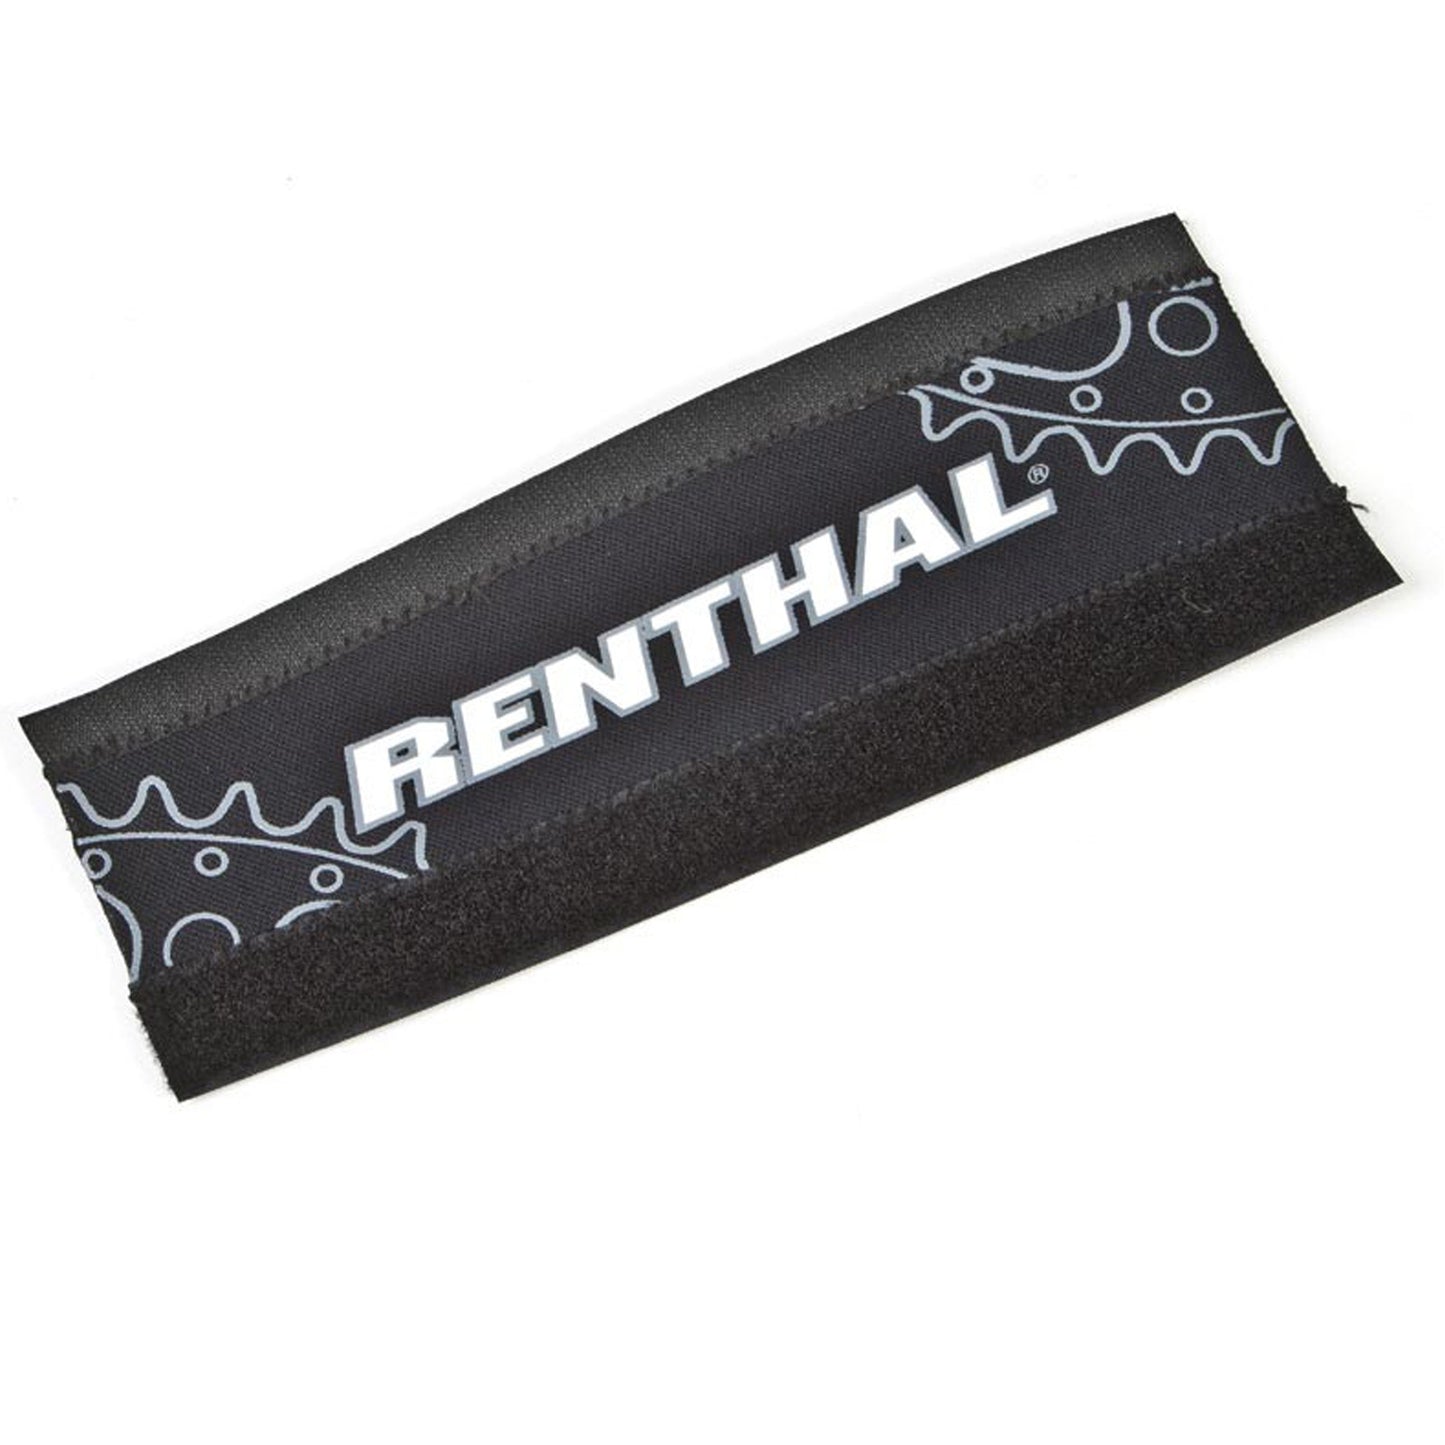 Renthal Padded Chainstay Frame Protector